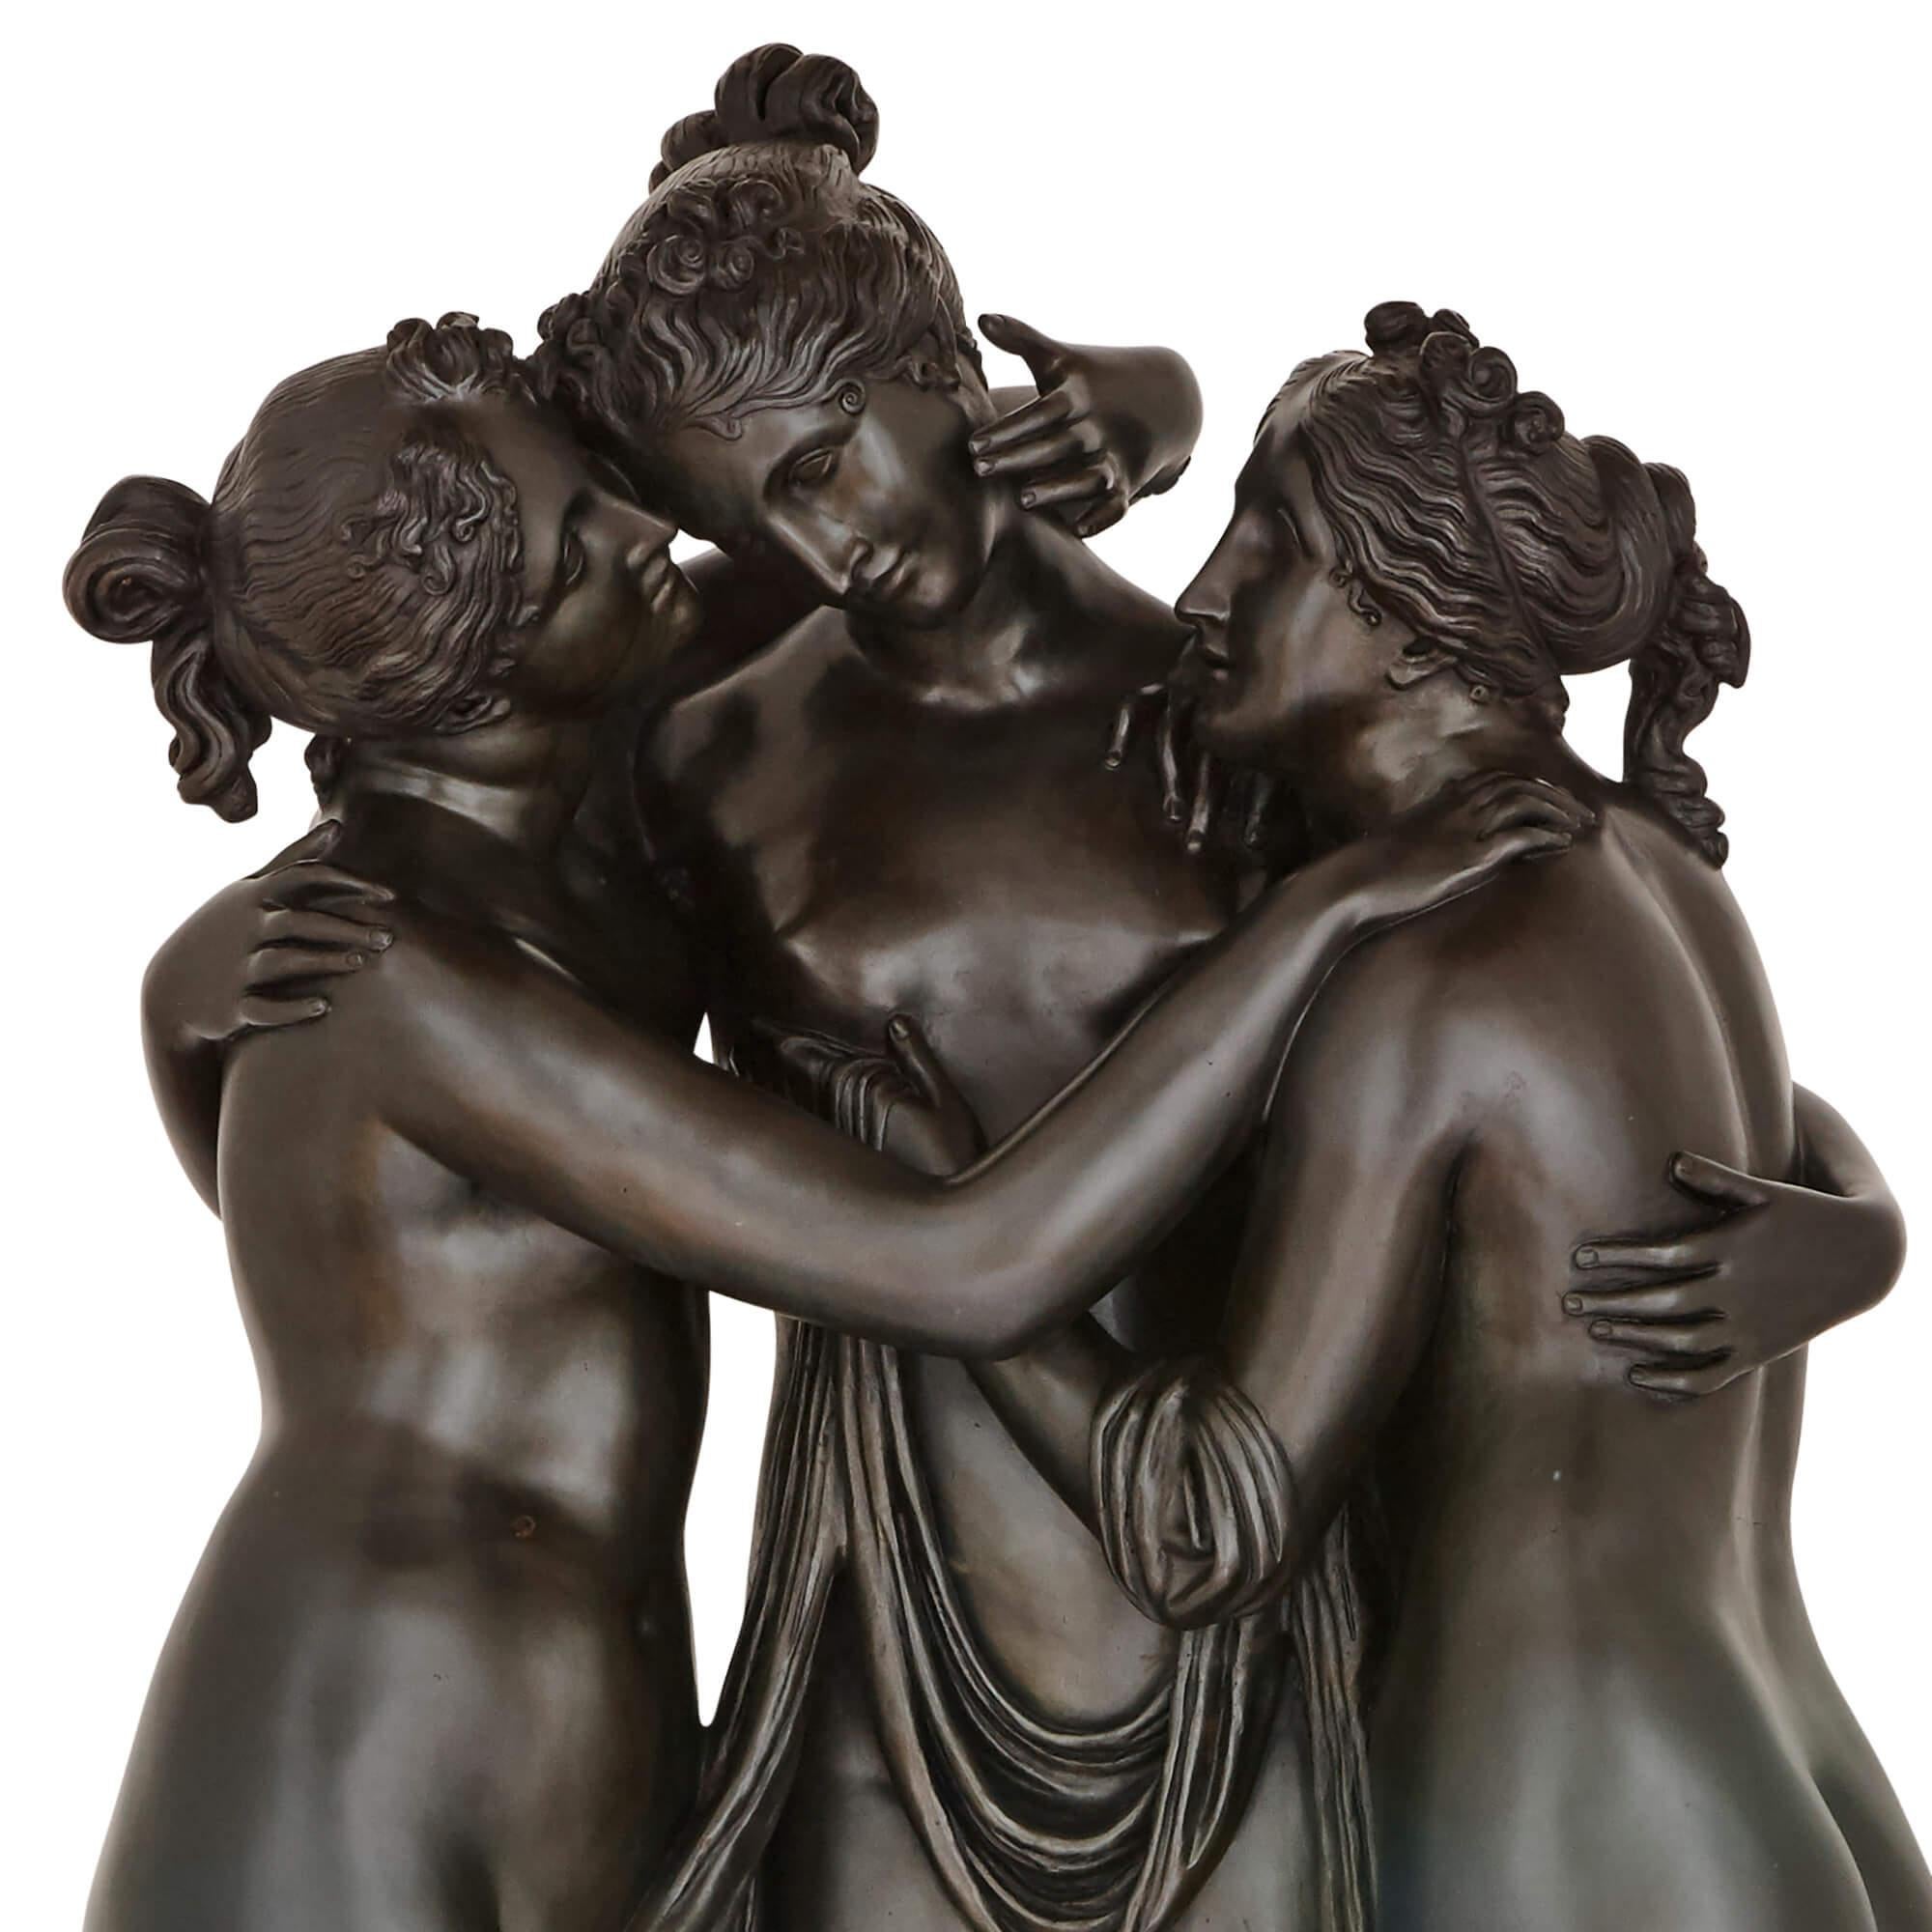 Antonio Canova (Italian, 1757-1822) is widely regarded as one of the masters of Neoclassical sculpture, and his marble group 'The Three Graces' is one of his most acclaimed works. This exceptional bronze group is a full-size replica of Canova's